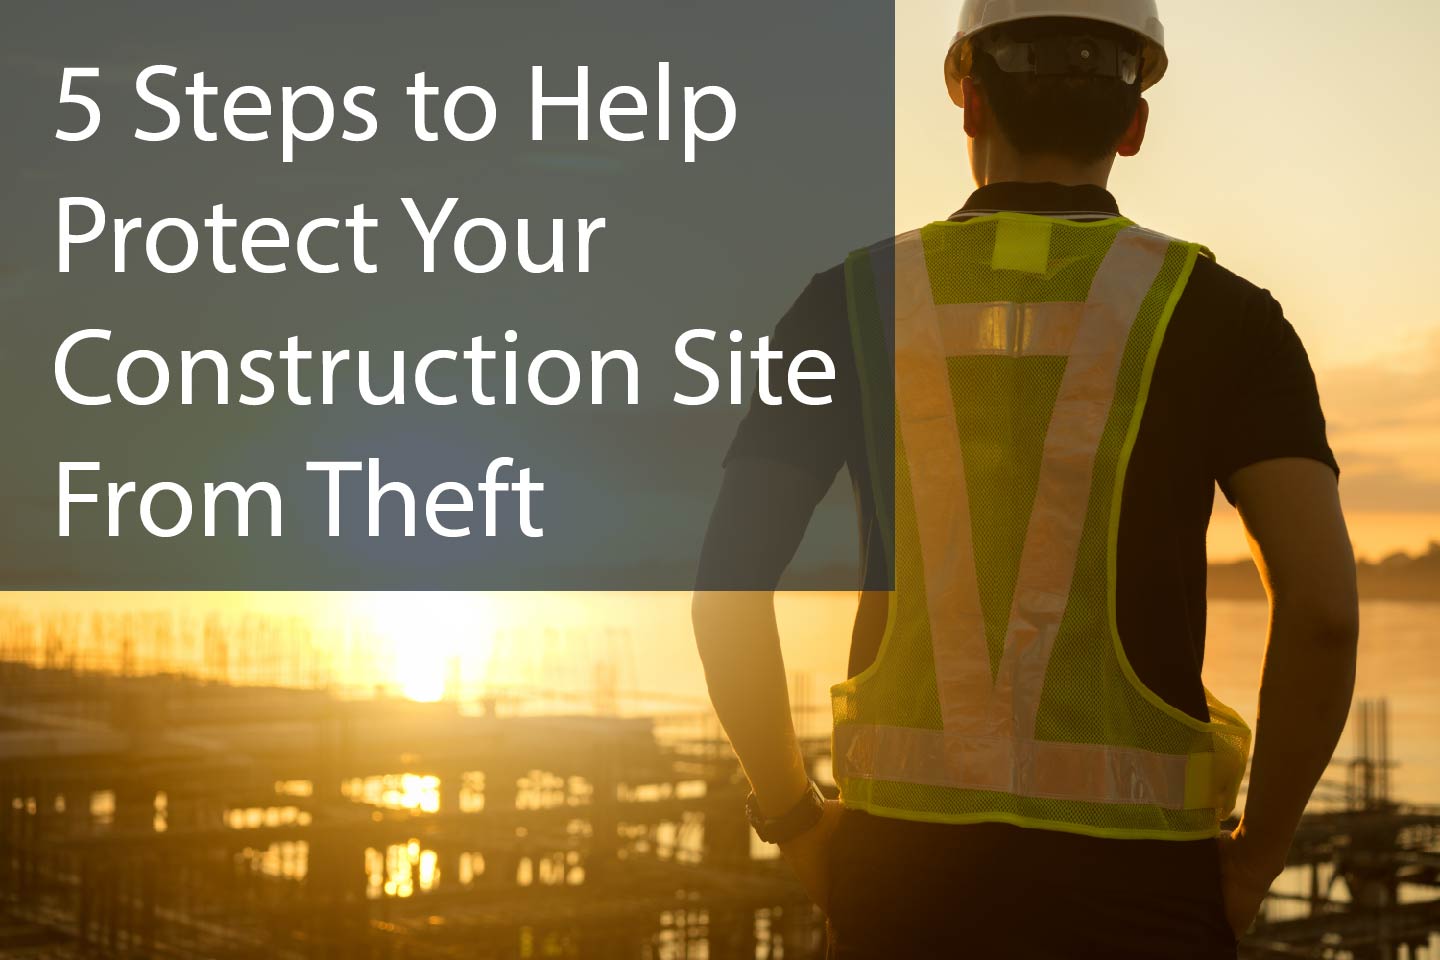 5 Steps to Help Protect Your Construction Site From Theft